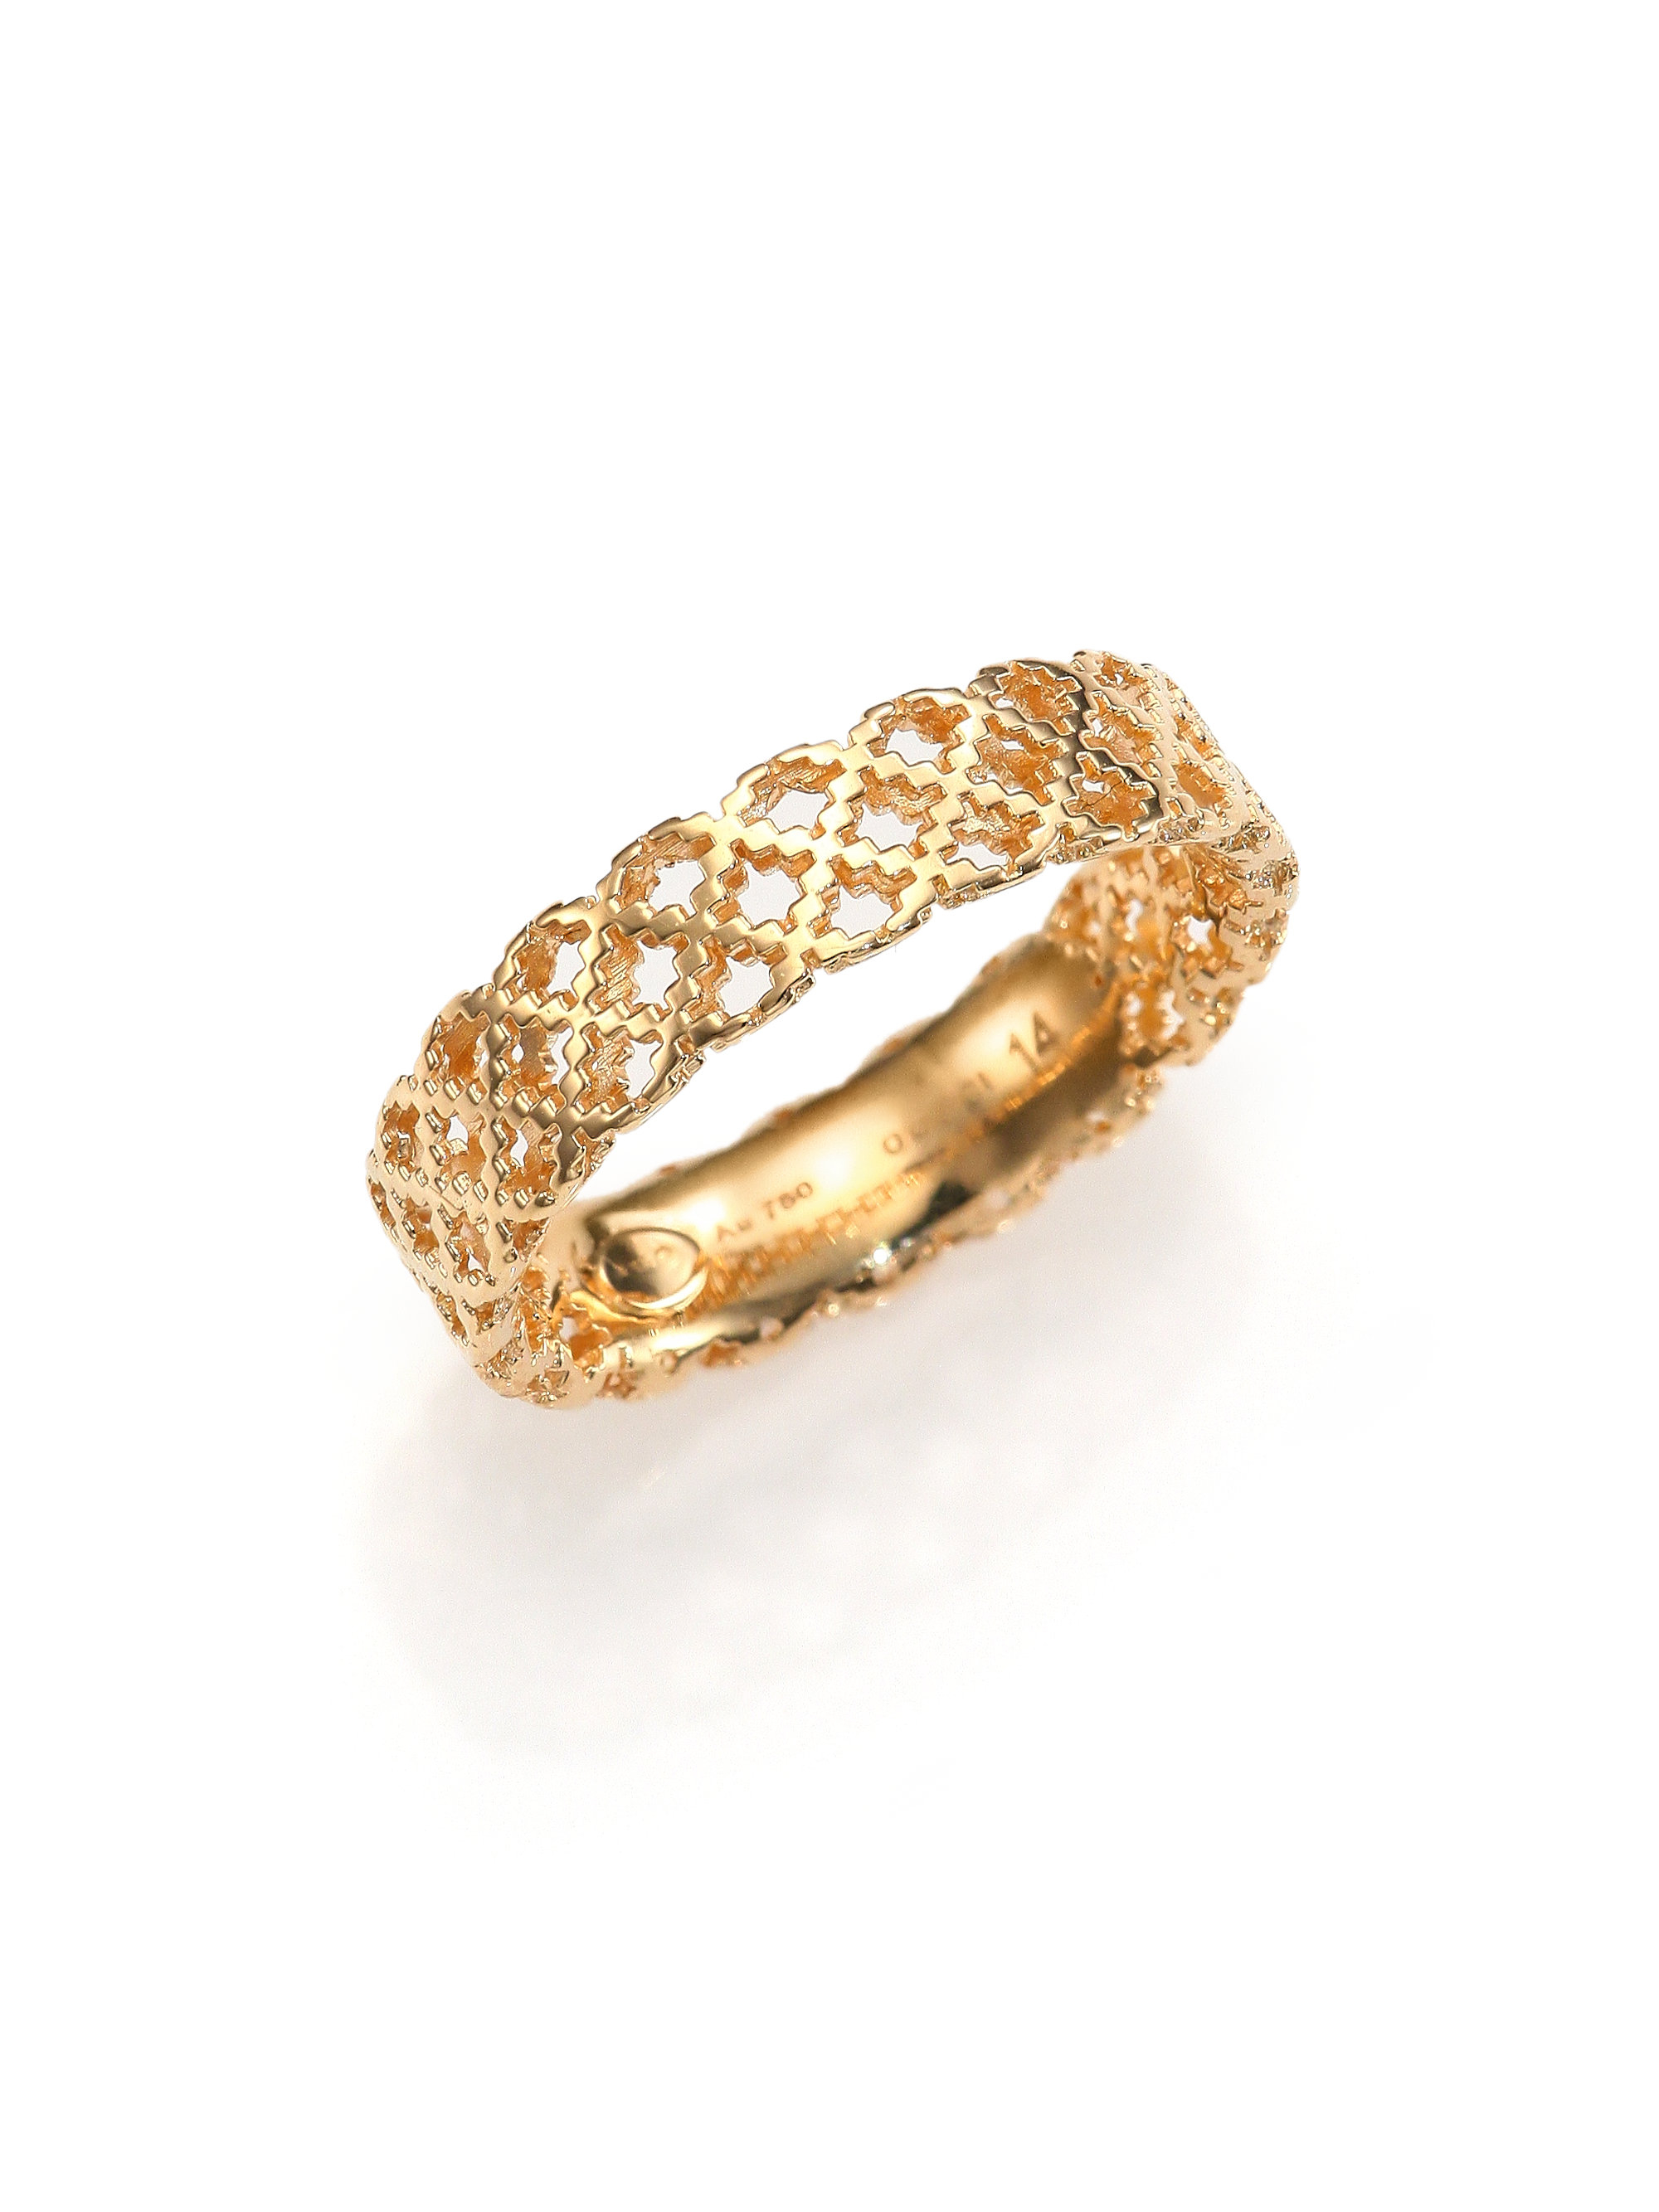 Gucci Ring Womens Gold Gucci 18k White Gold Diamond Ring // Ring Size